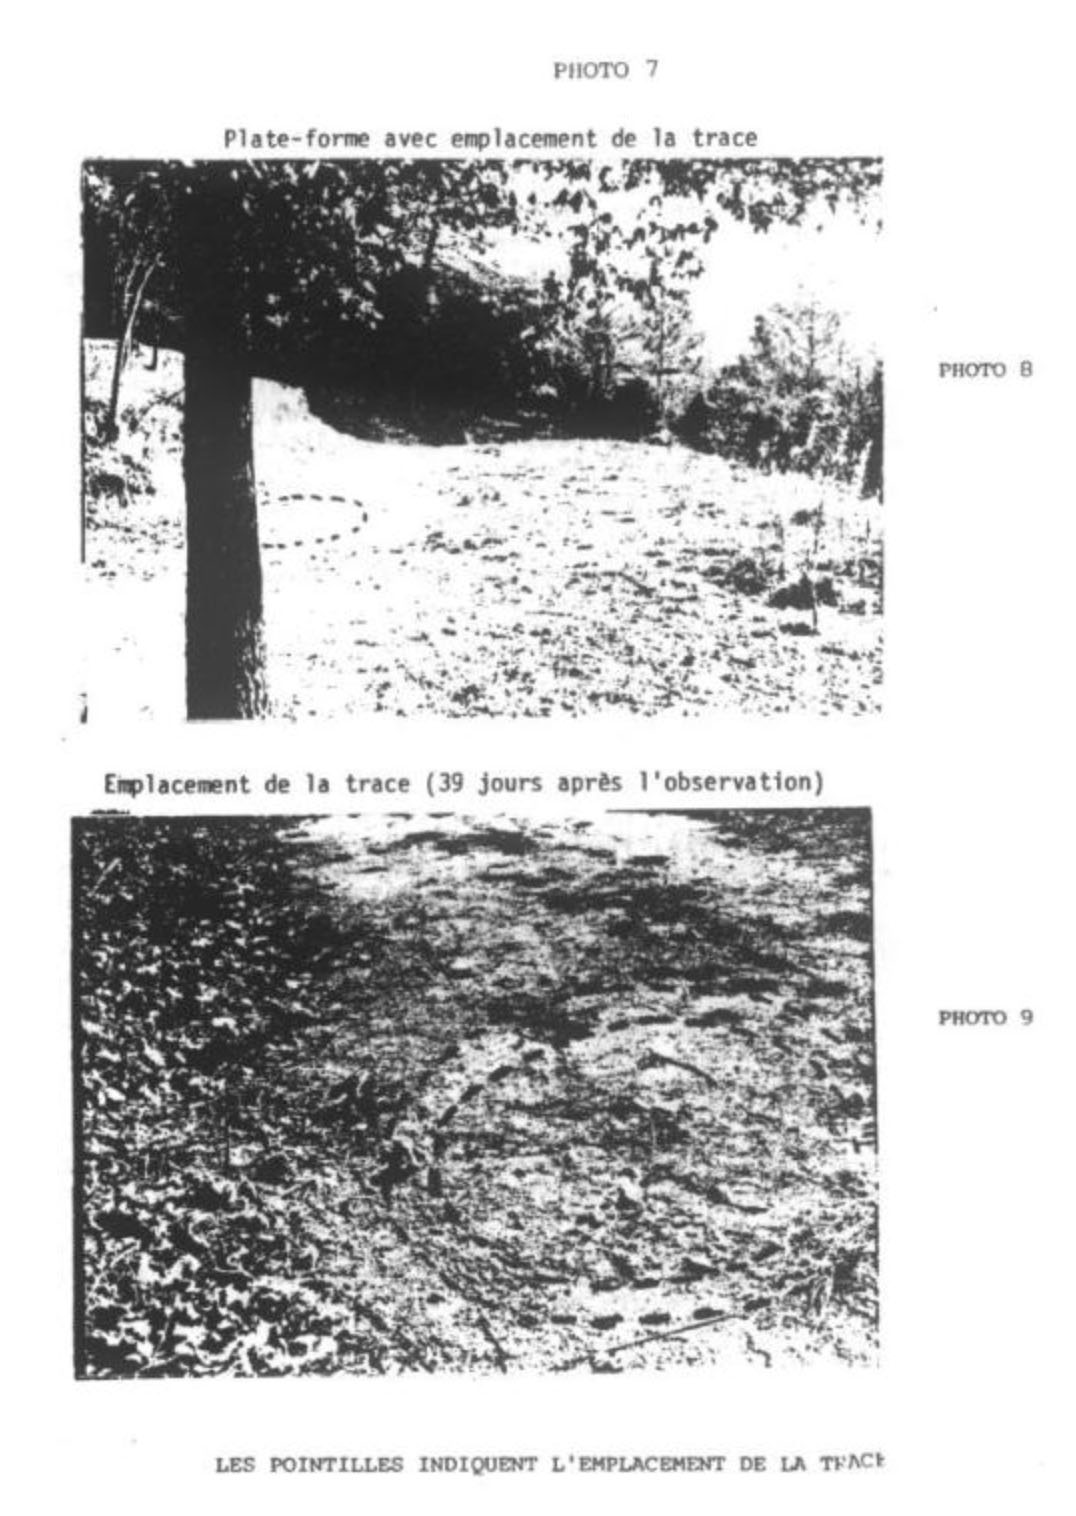 Image from GEIPAN report on Trans-en-Provence UFO case - Landing Site (2)